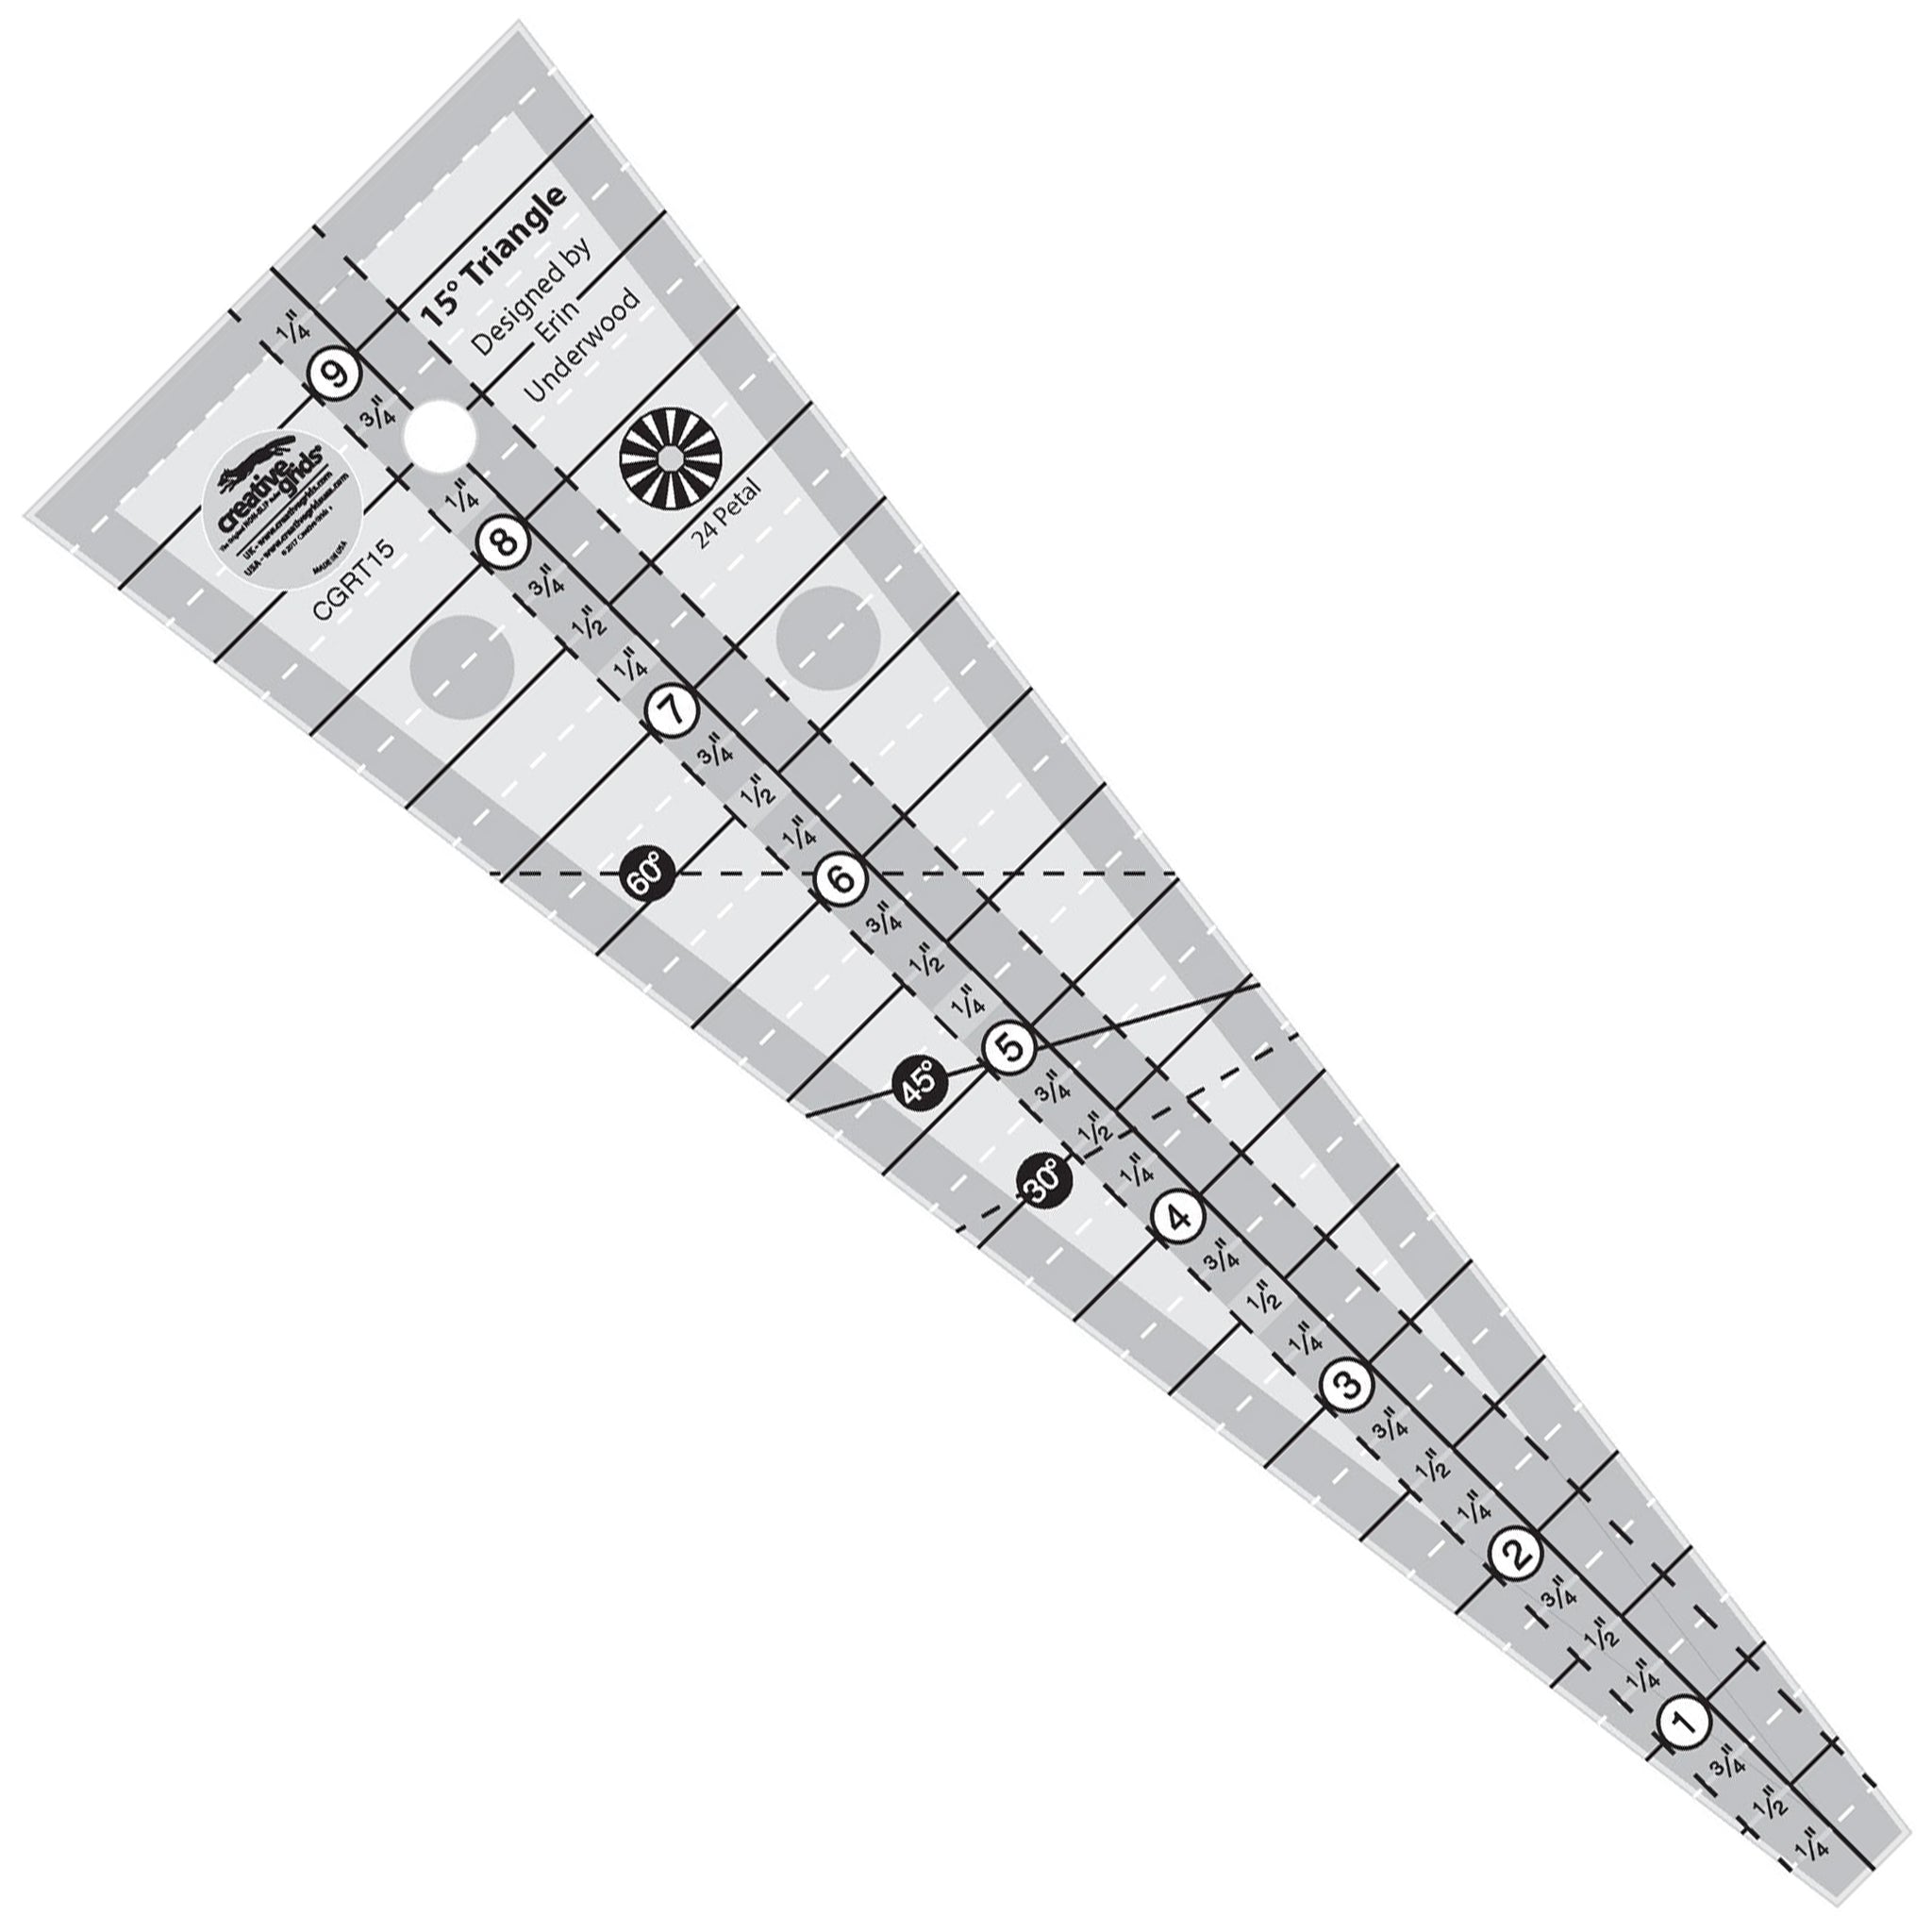 Creative Grids Quilting Rulers - 30